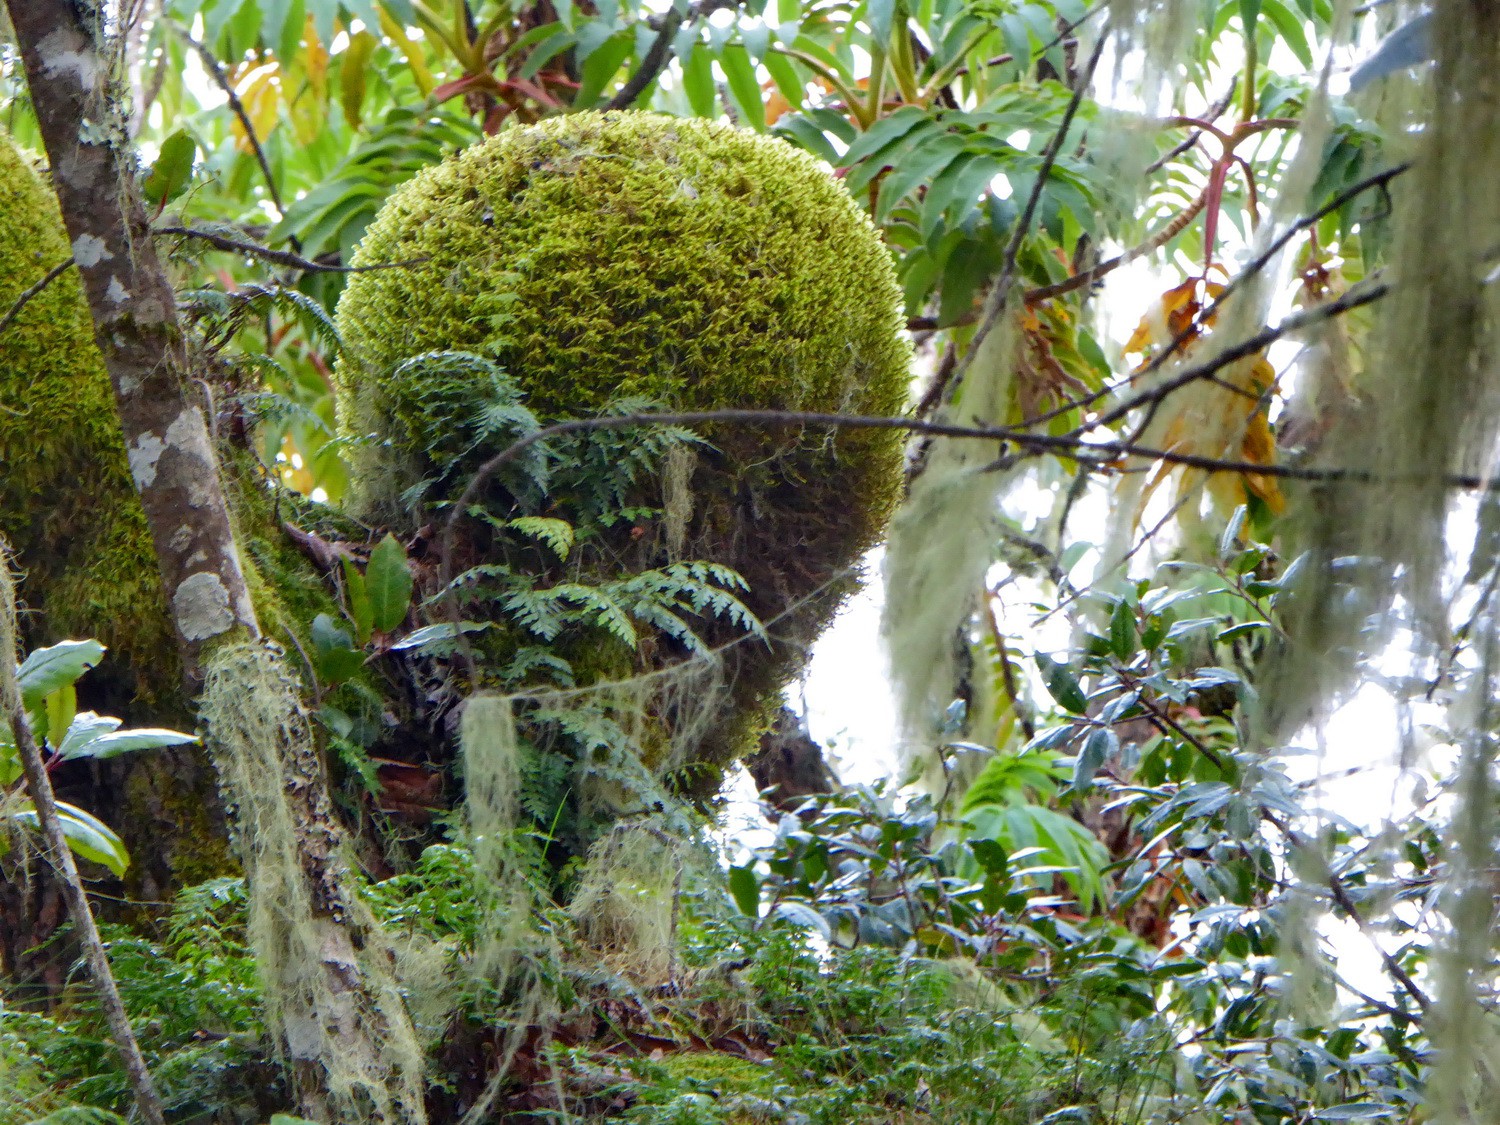 Plants in the rain forest